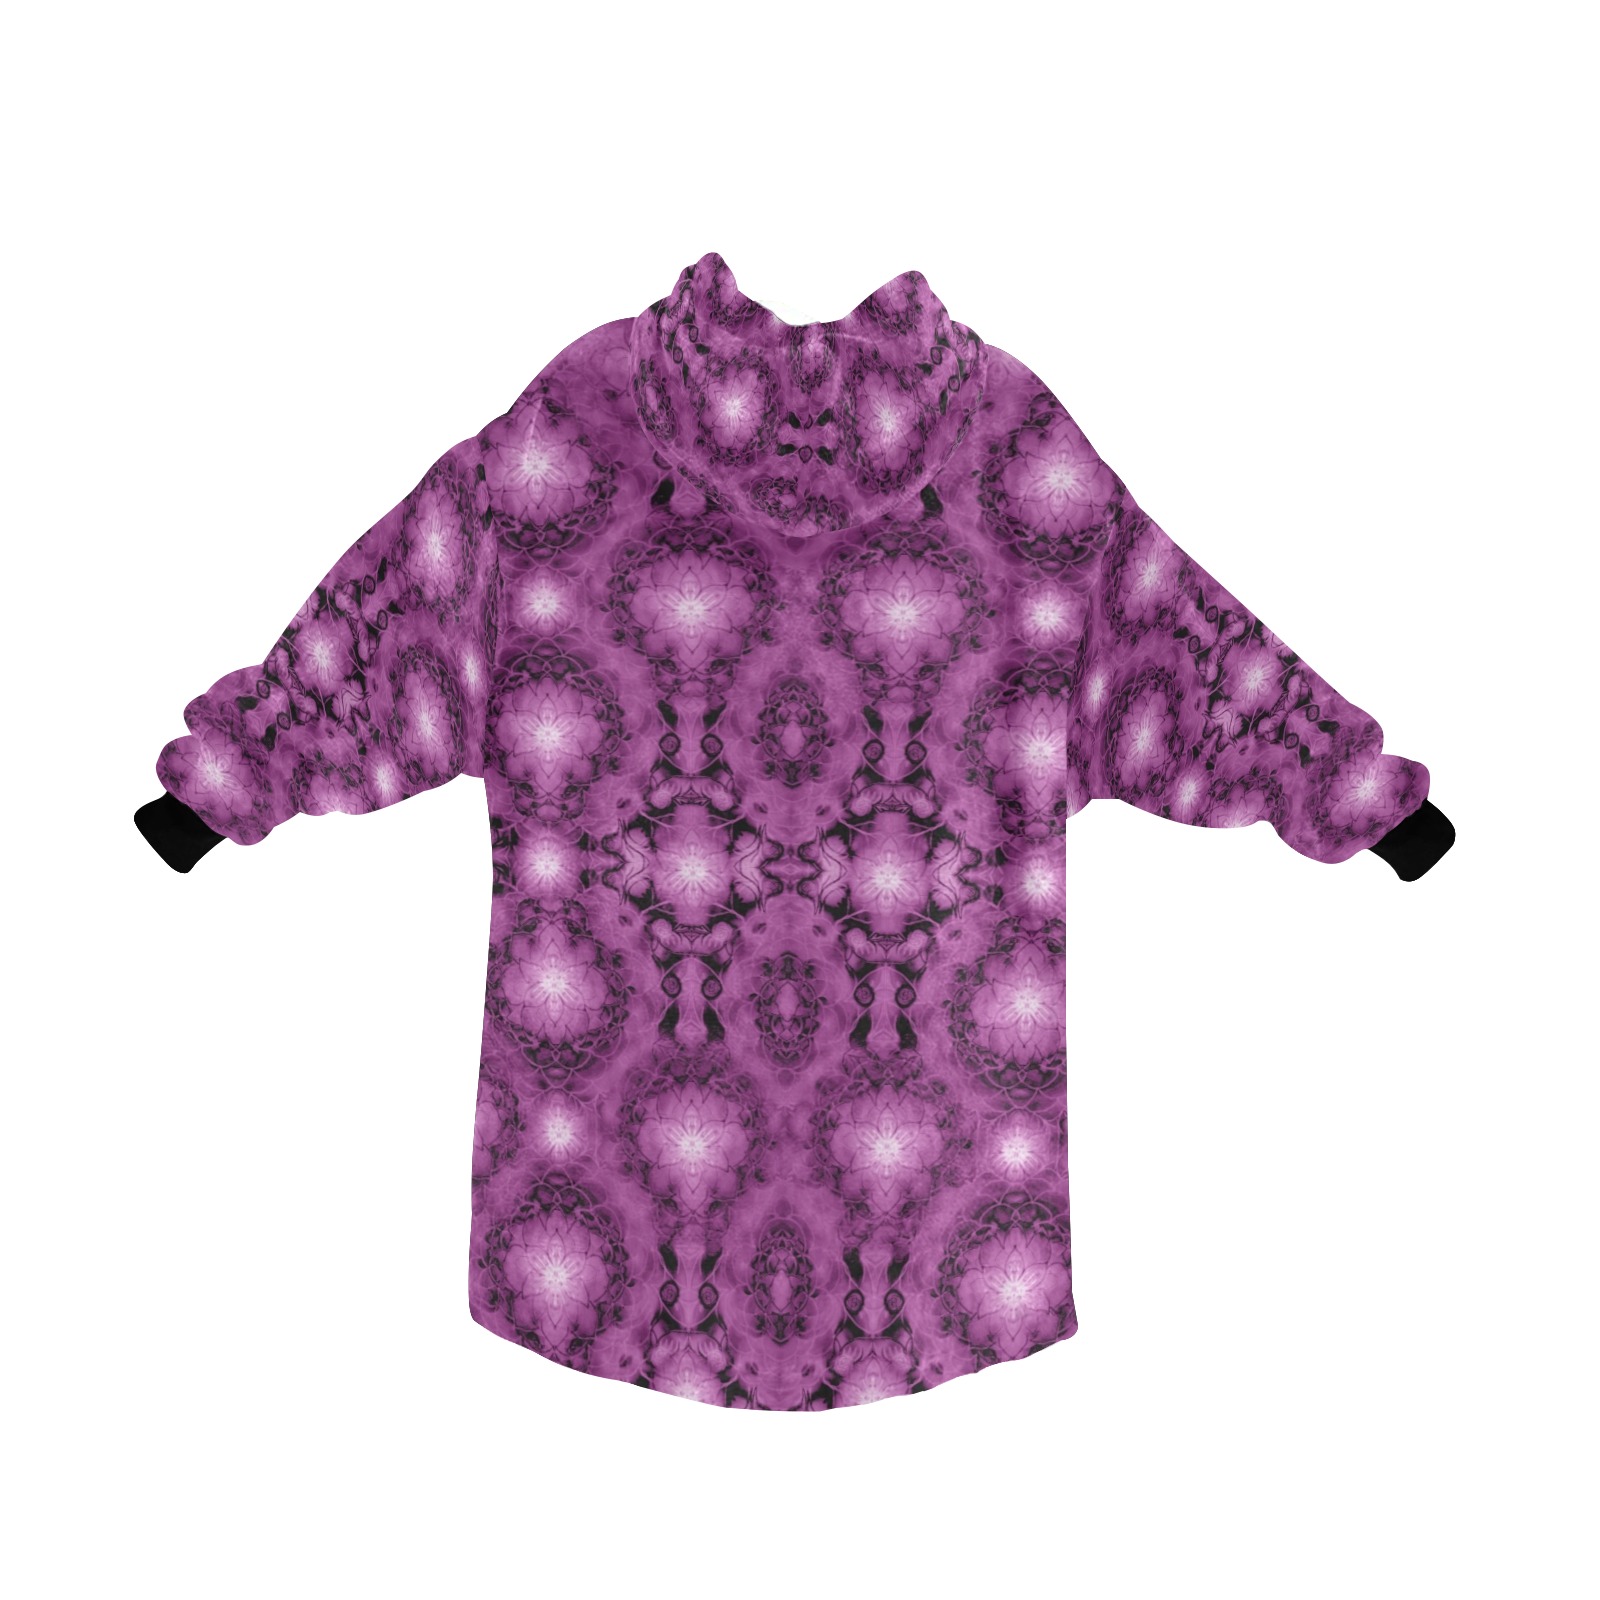 Nidhi decembre 2014-pattern 7-44x55 inches-purple Blanket Hoodie for Men